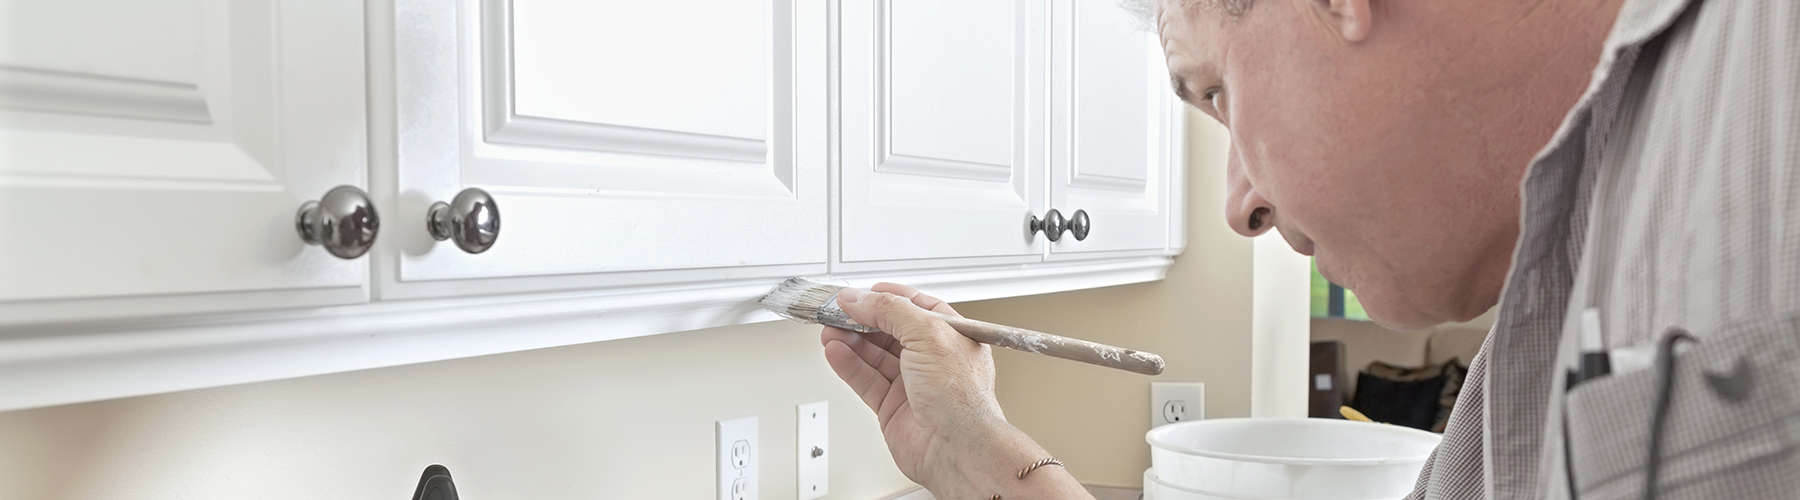 How To Paint Kitchen Cabinets   Norfolk Hardware & Home Center